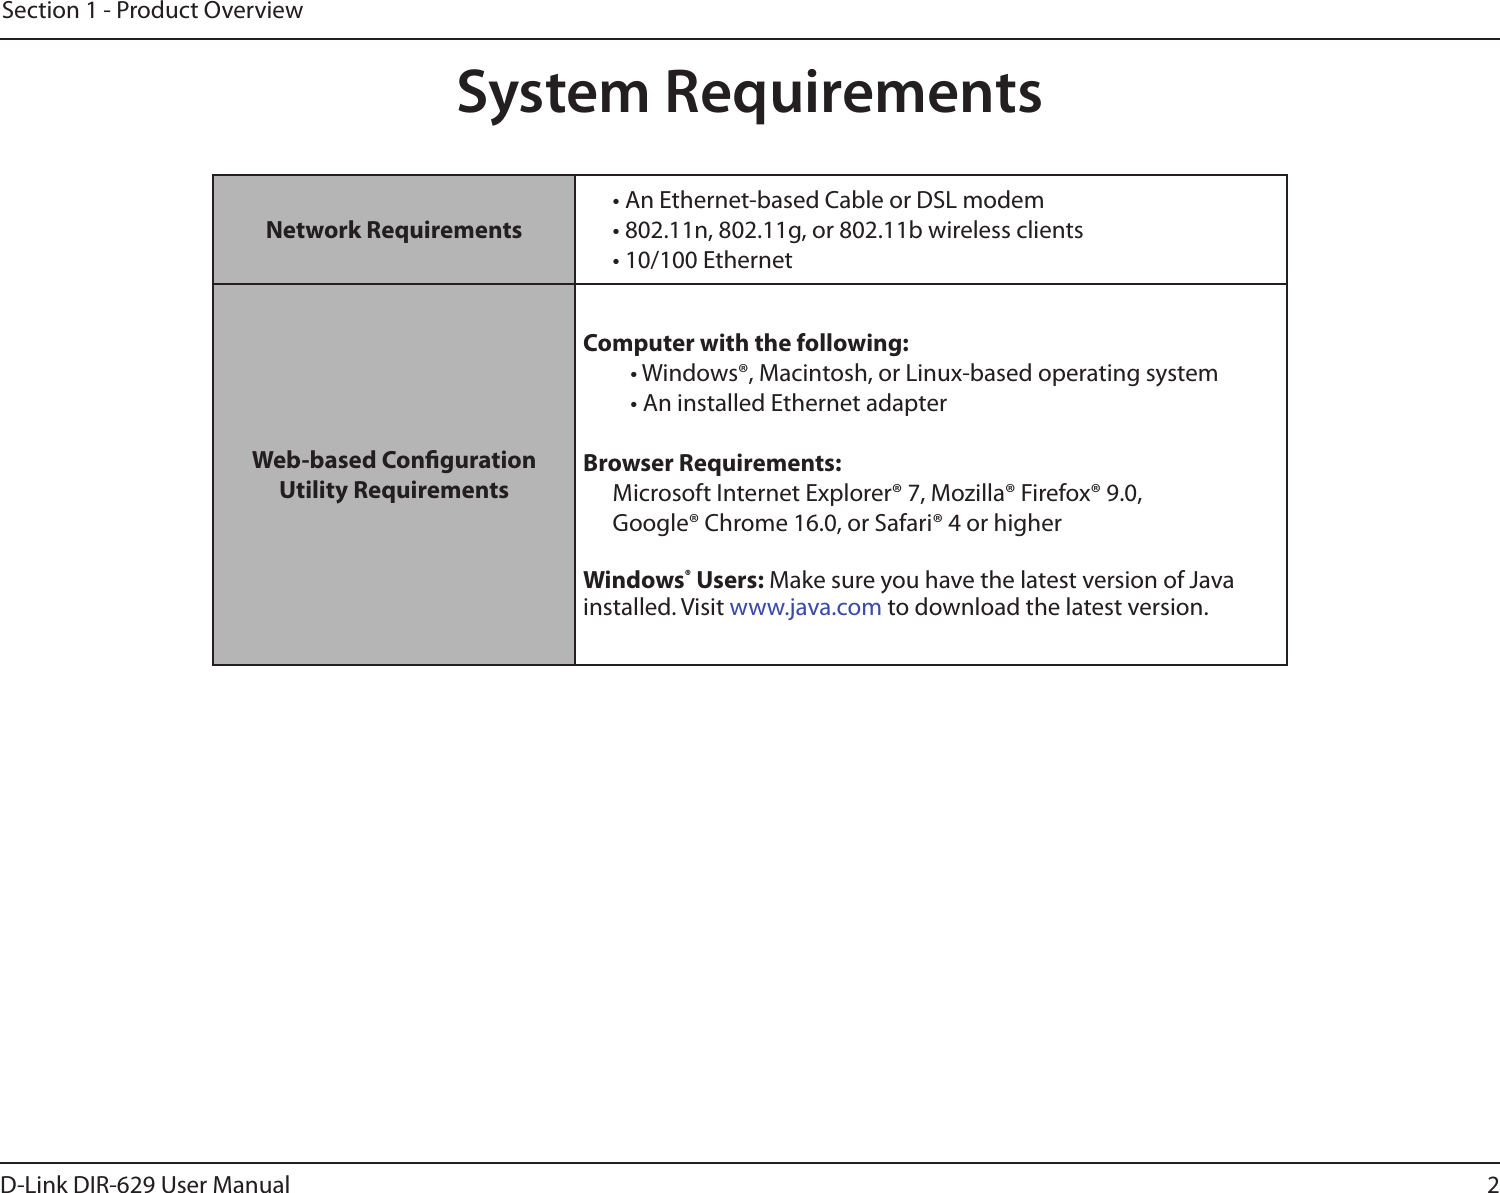 2D-Link DIR-629 User ManualSection 1 - Product OverviewNetwork RequirementsWeb-based Conguration Utility RequirementsComputer with the following:Browser Requirements:Microsoft Internet Explorer® 7, Mozilla® Firefox® 9.0,  Google® Chrome 16.0, or Safari® 4 or higherWindows® Users: Make sure you have the latest version of Java installed. Visit www.java.com to download the latest version.System Requirements